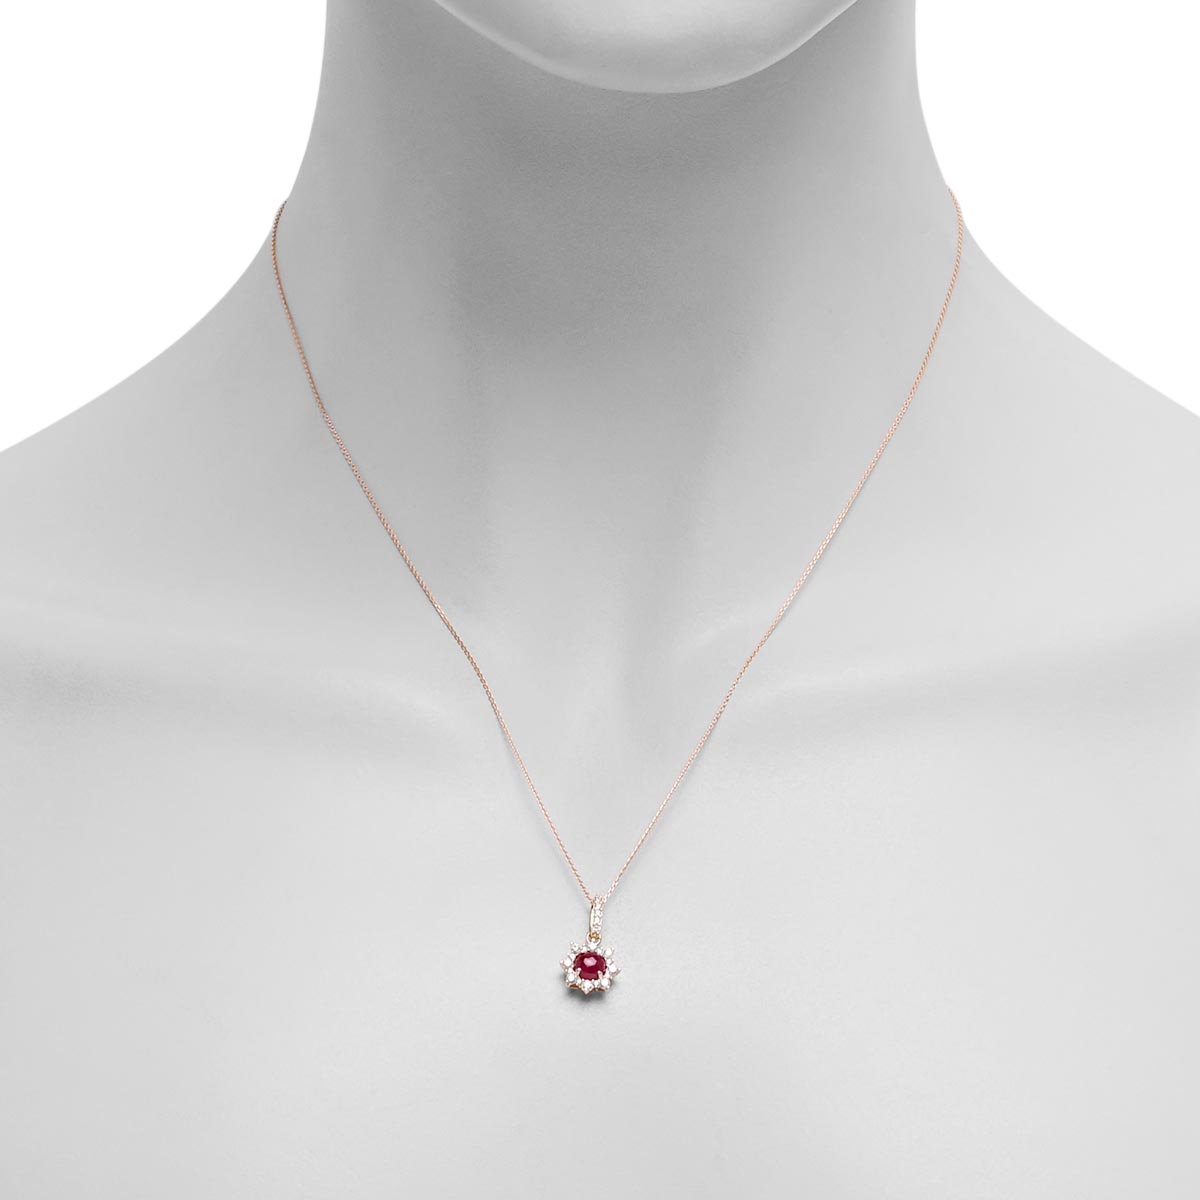 Greenland Ruby Necklace in 10kt Yellow Gold with Diamonds (1/5ct tw)